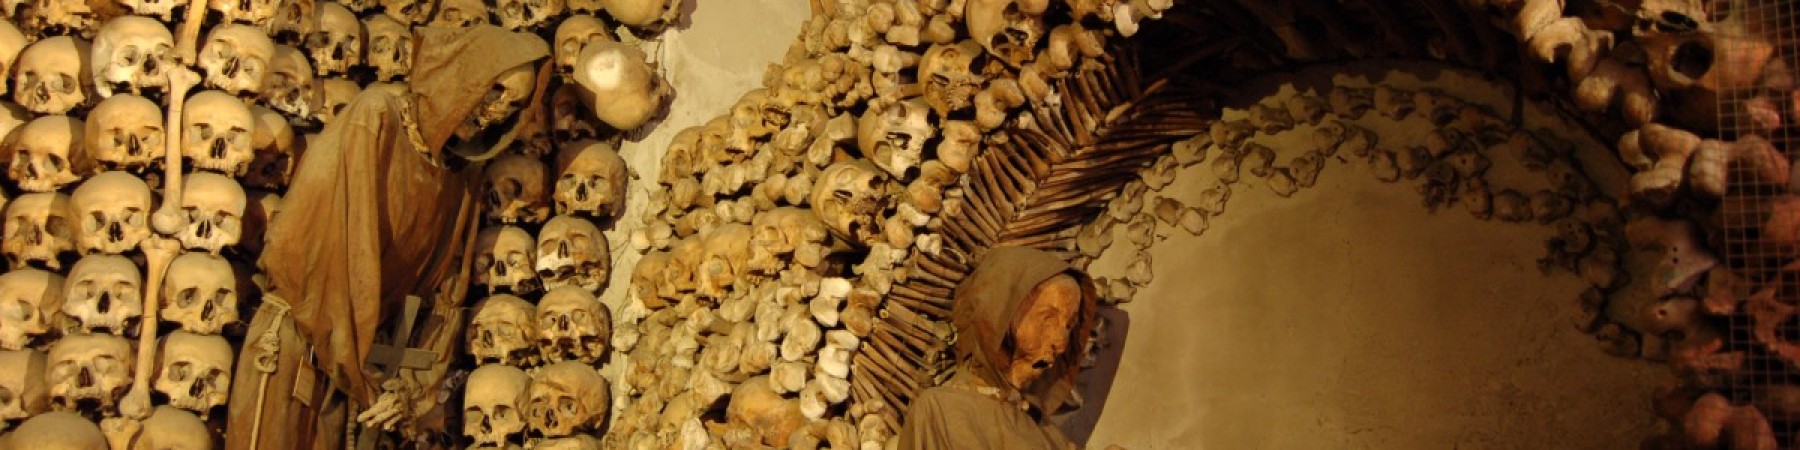 PRIVATE TOUR - The Capuchin Crypt and the Christian Catacombs